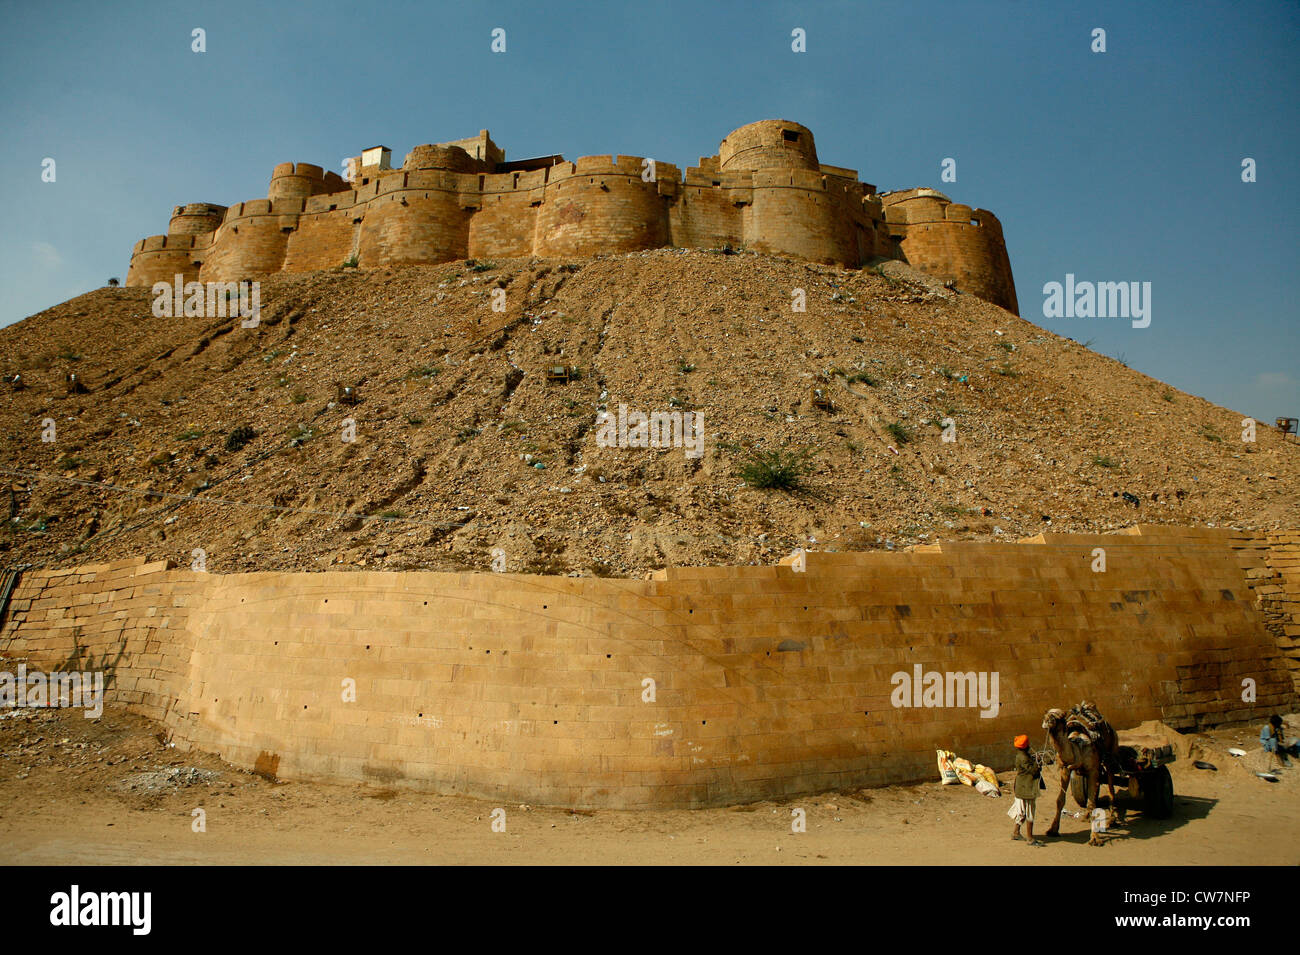 a view of Jaisalmer fort of Rajasthan, India Stock Photo